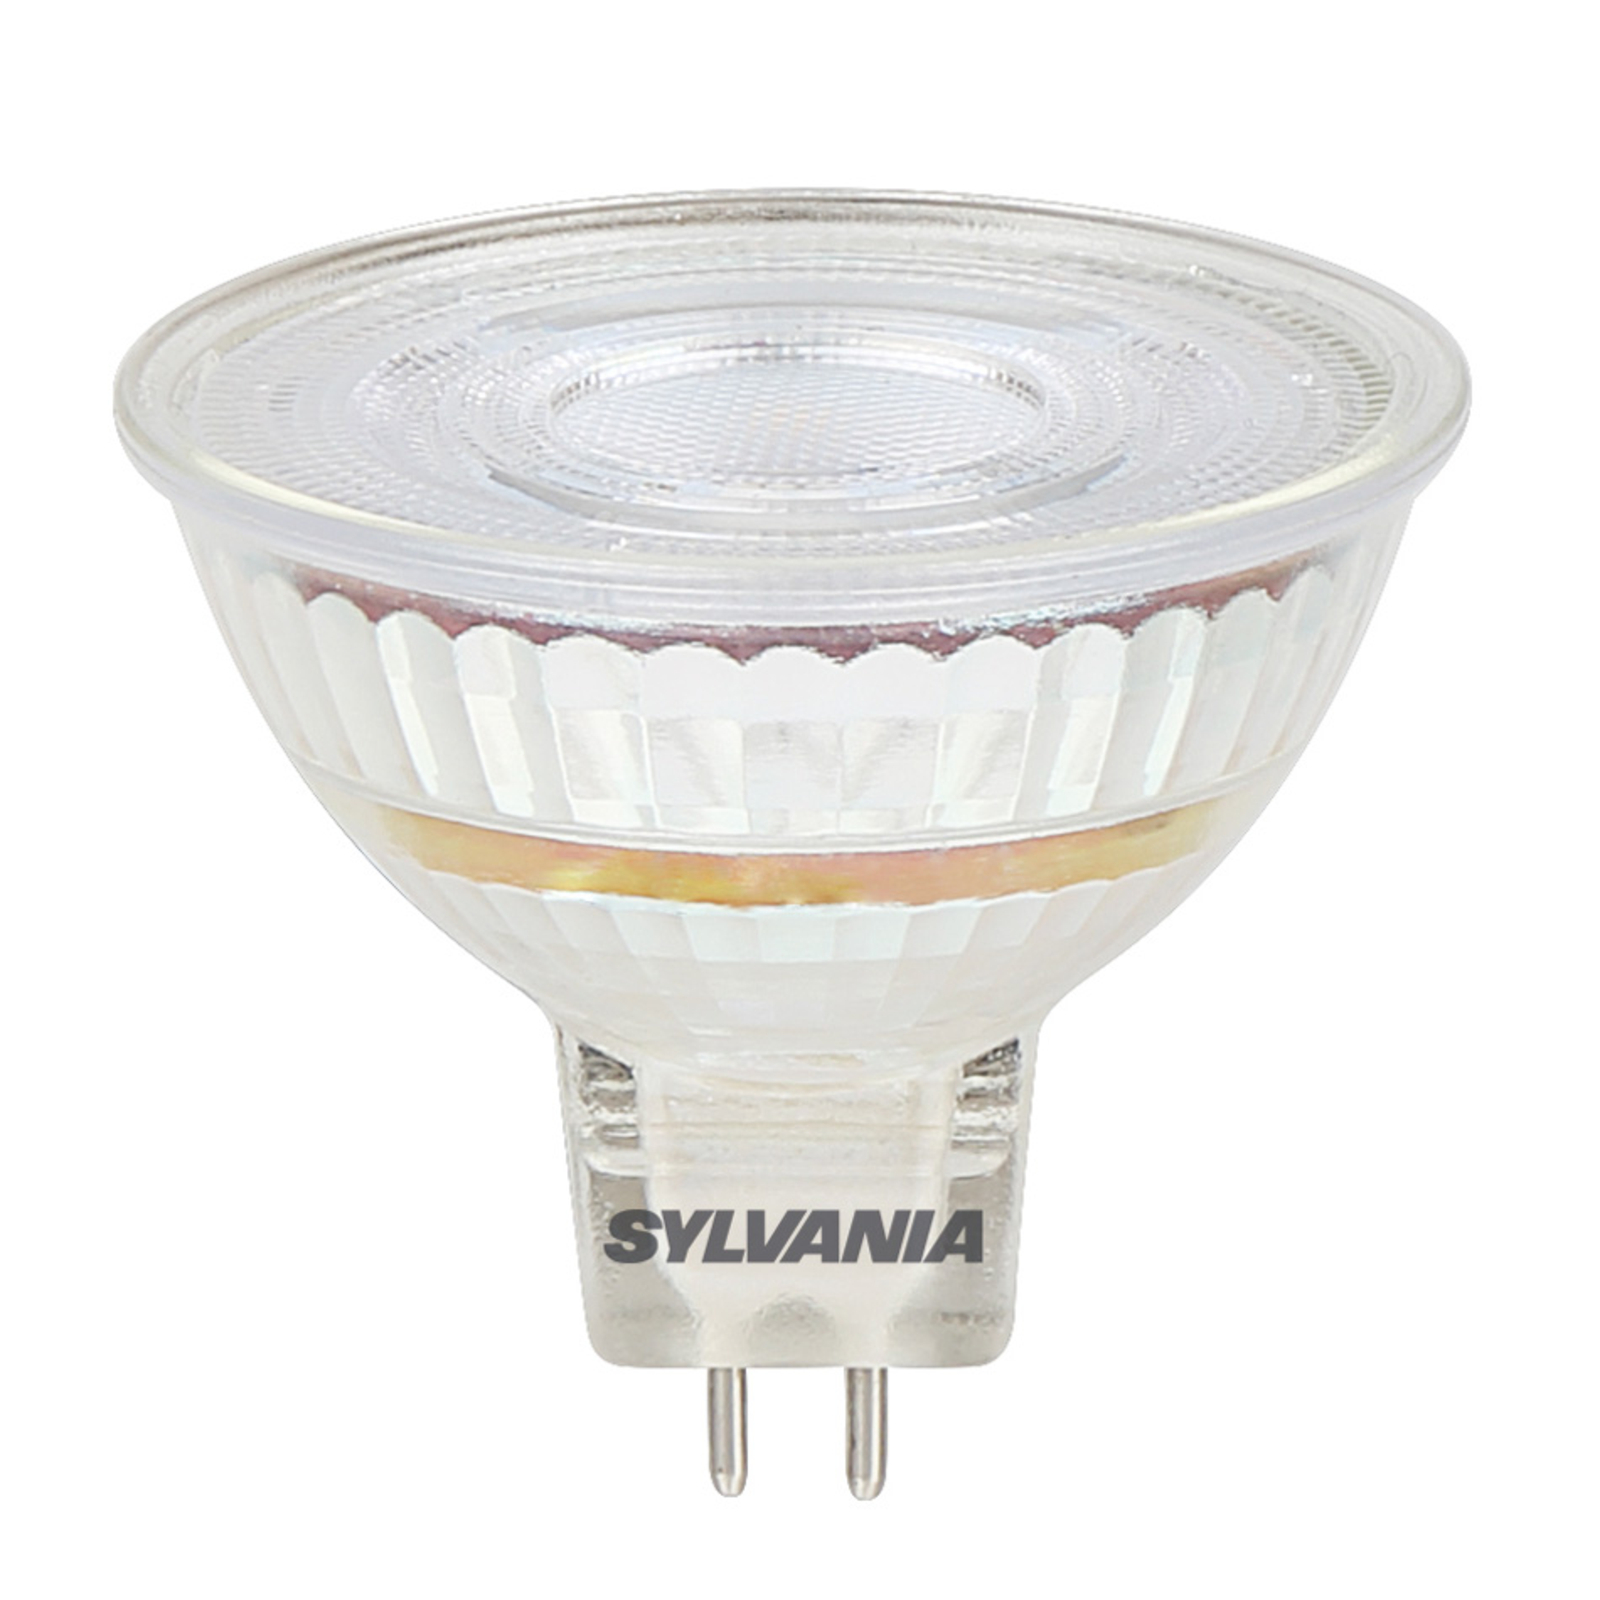 Pastries Hare A faithful Reflector LED bulb GU5.3 Superia MR16 7 W dimmable | Lights.ie